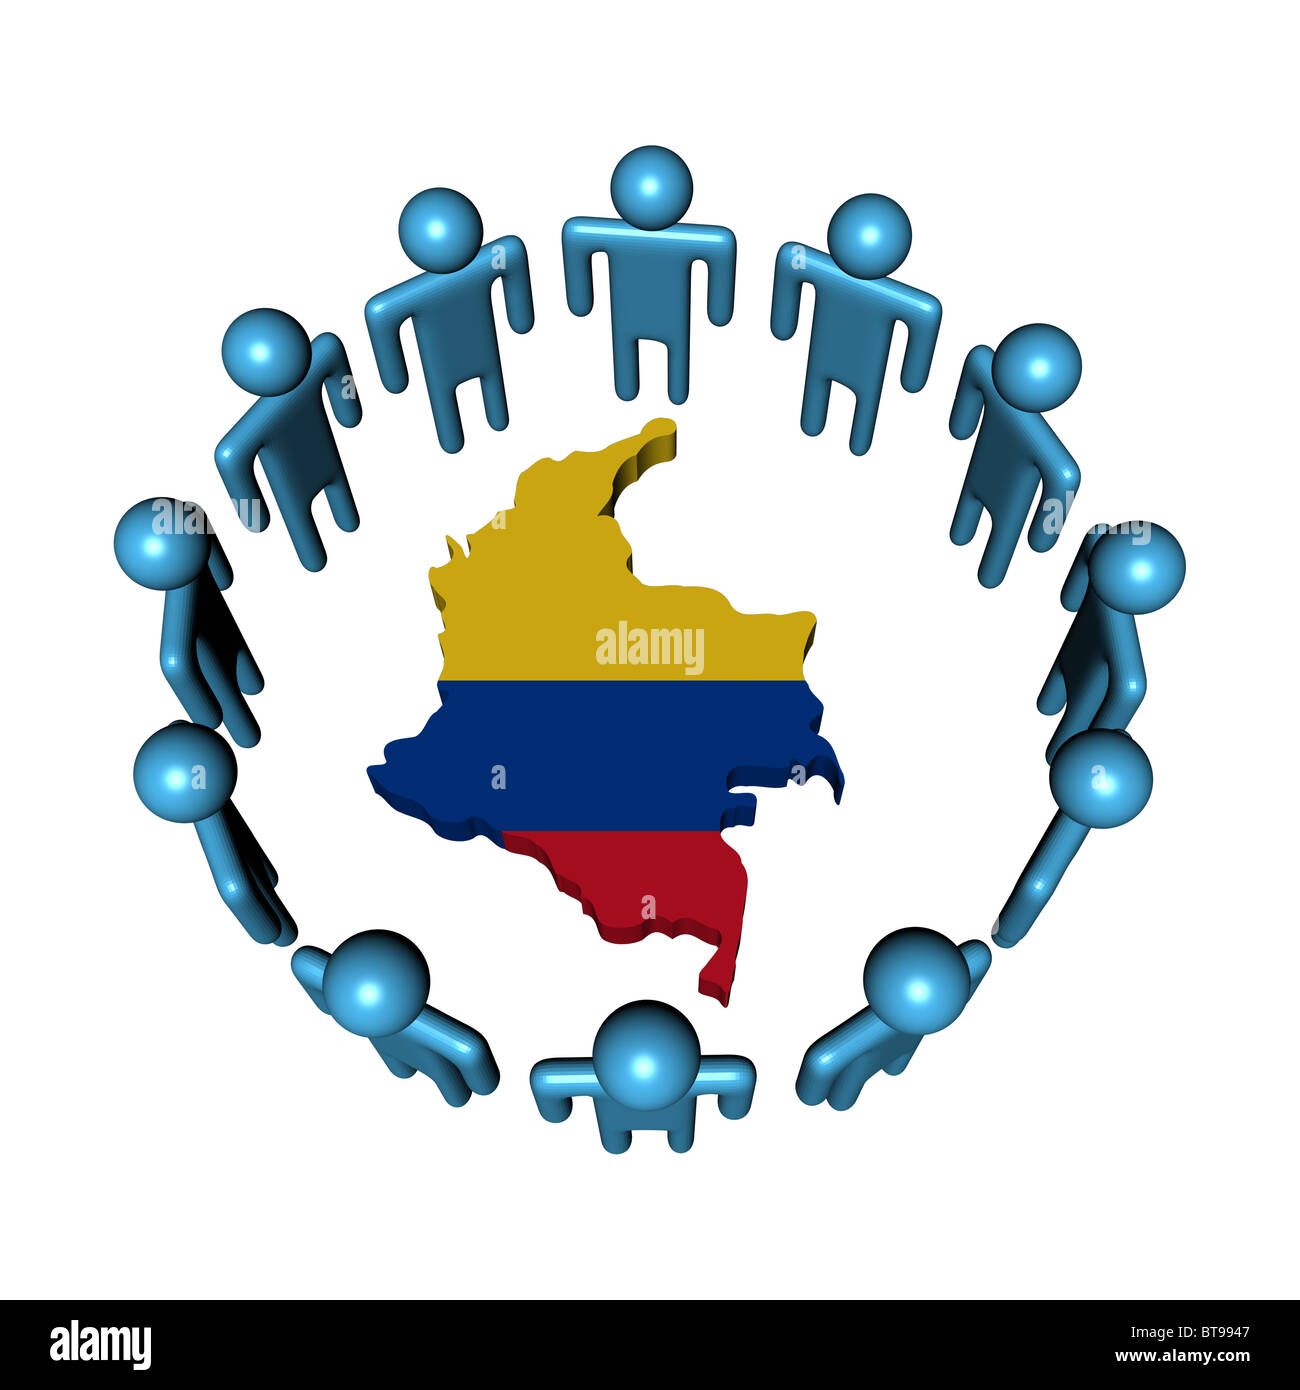 Circle of abstract people around Colombia map flag illustration Stock Photo